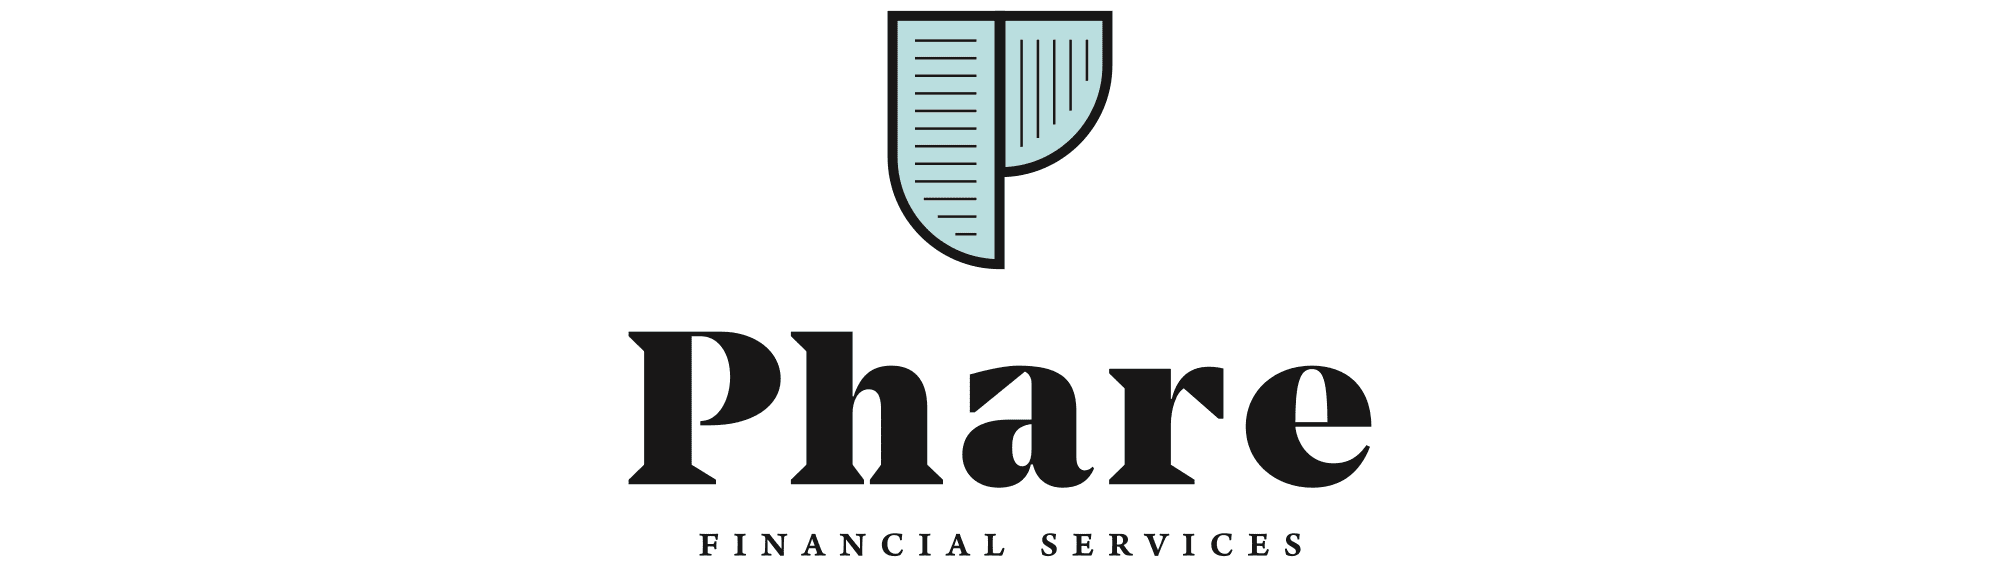 Phare Financial Services